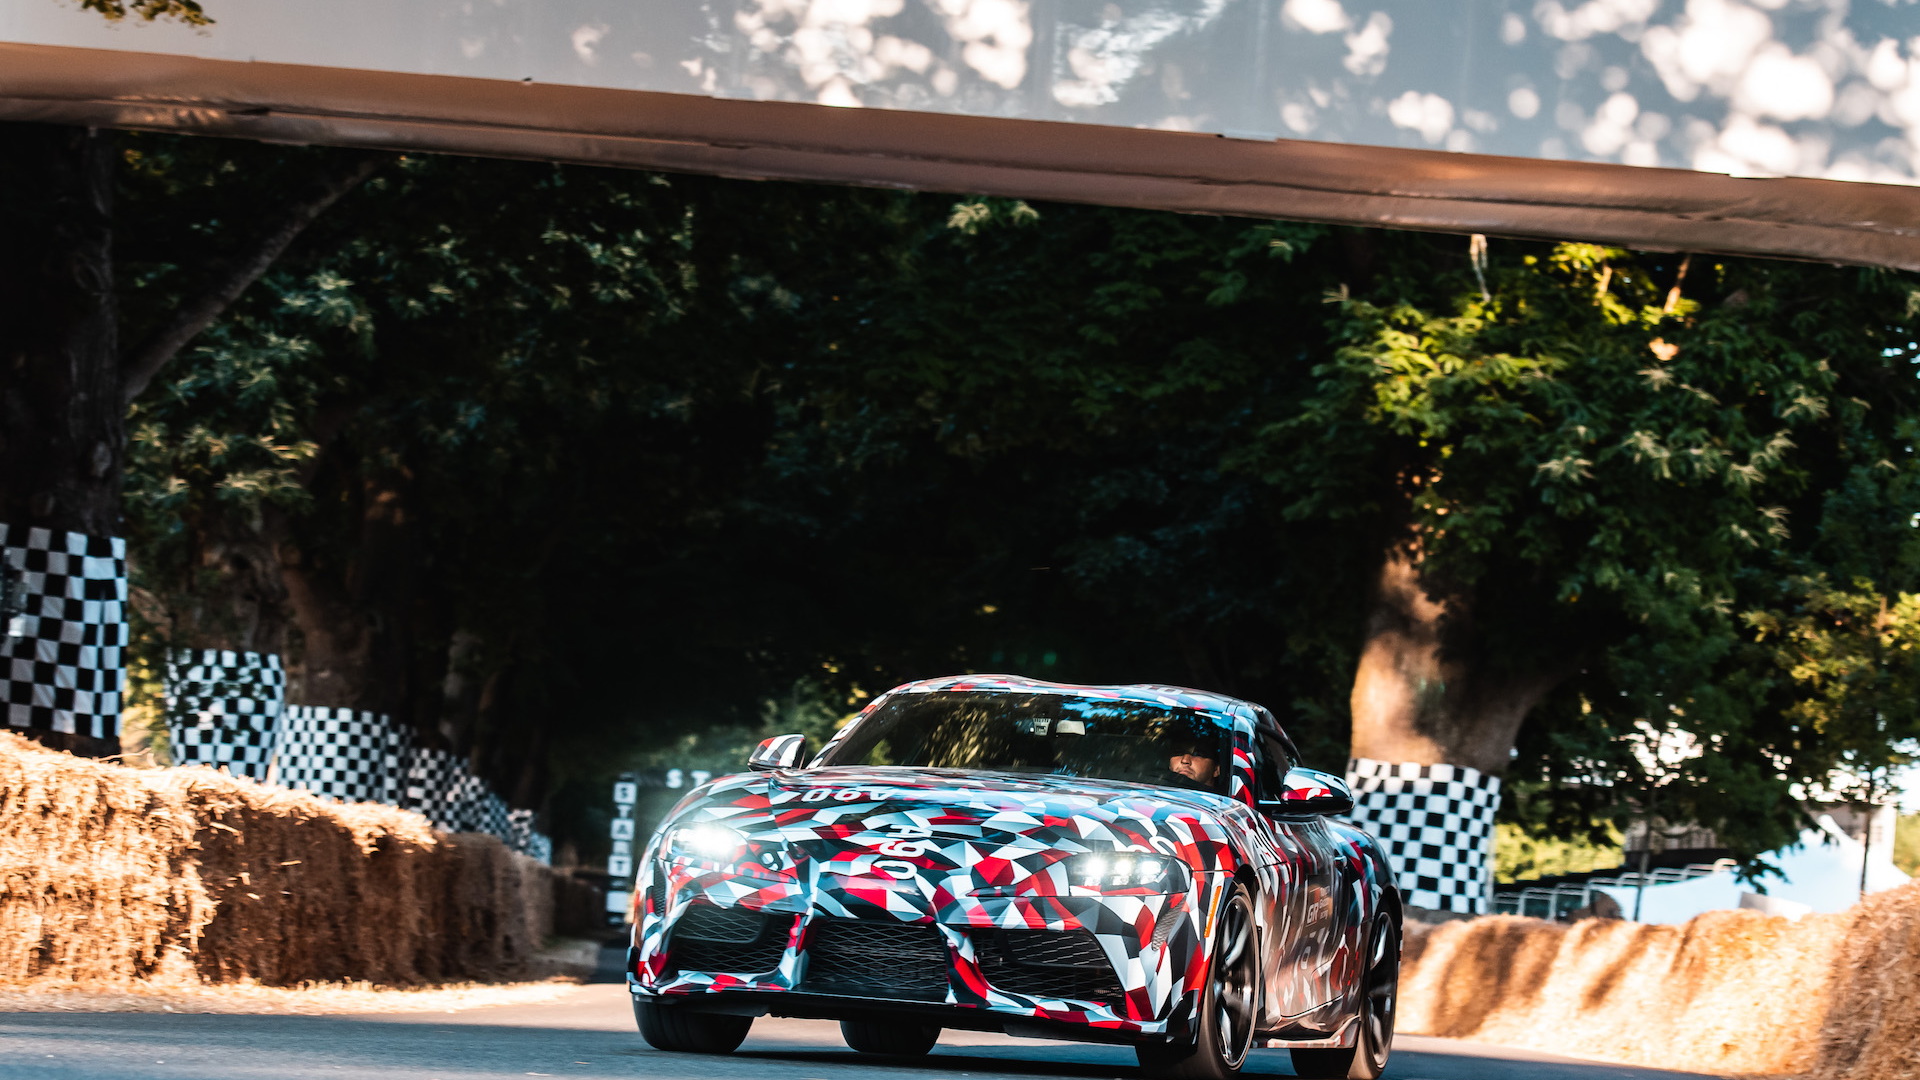 Toyota Supra dynamic debut at 2018 Goodwood Festival of Speed